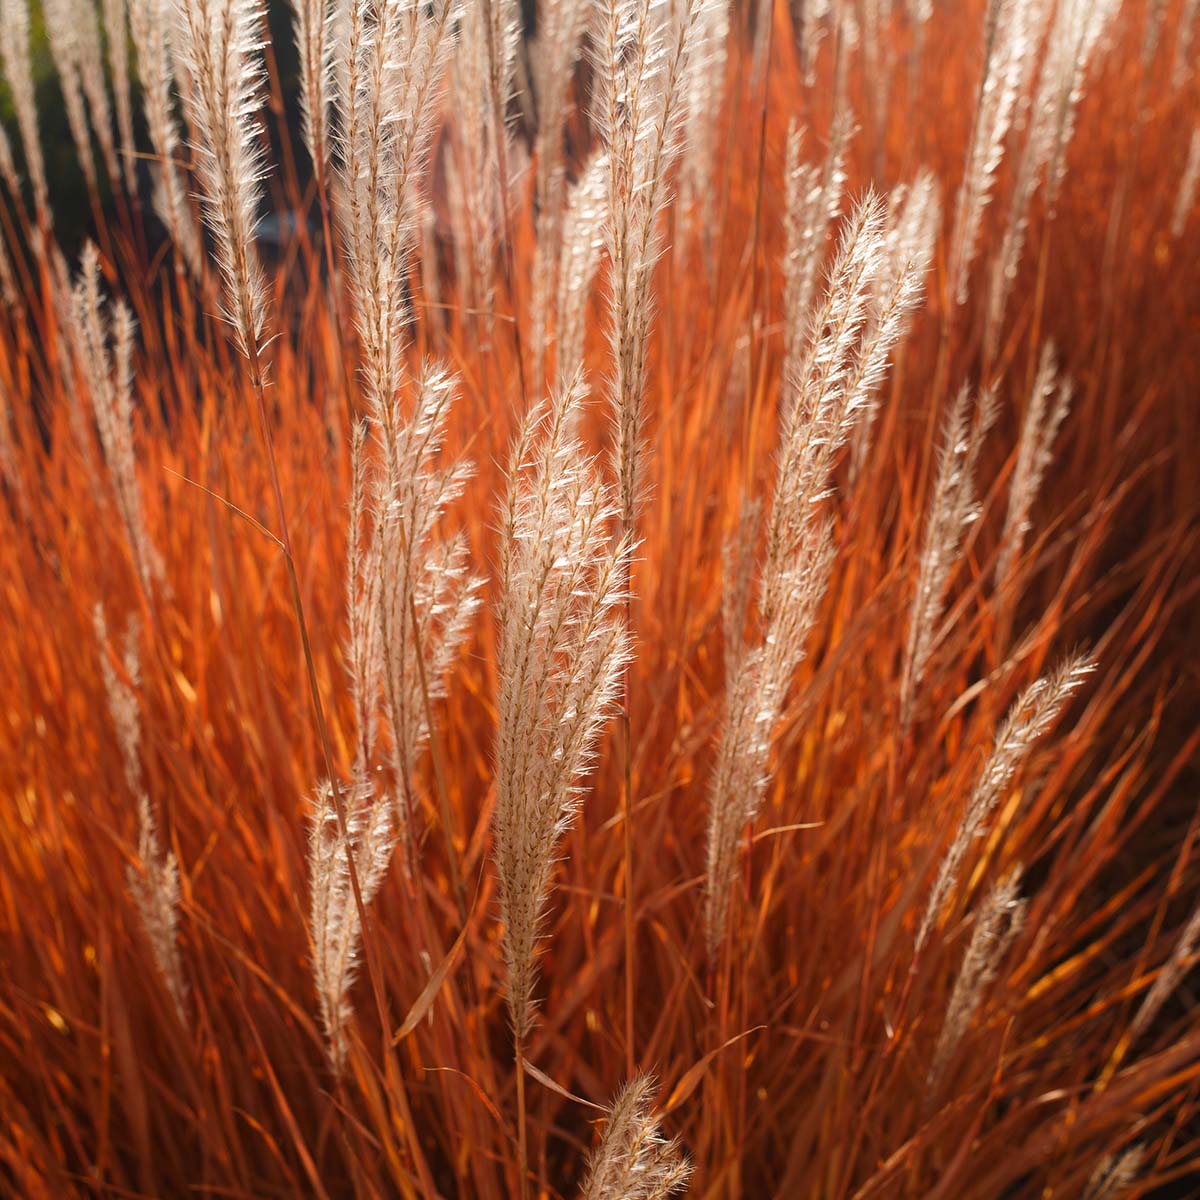 Orange grasses with white feathered tips.